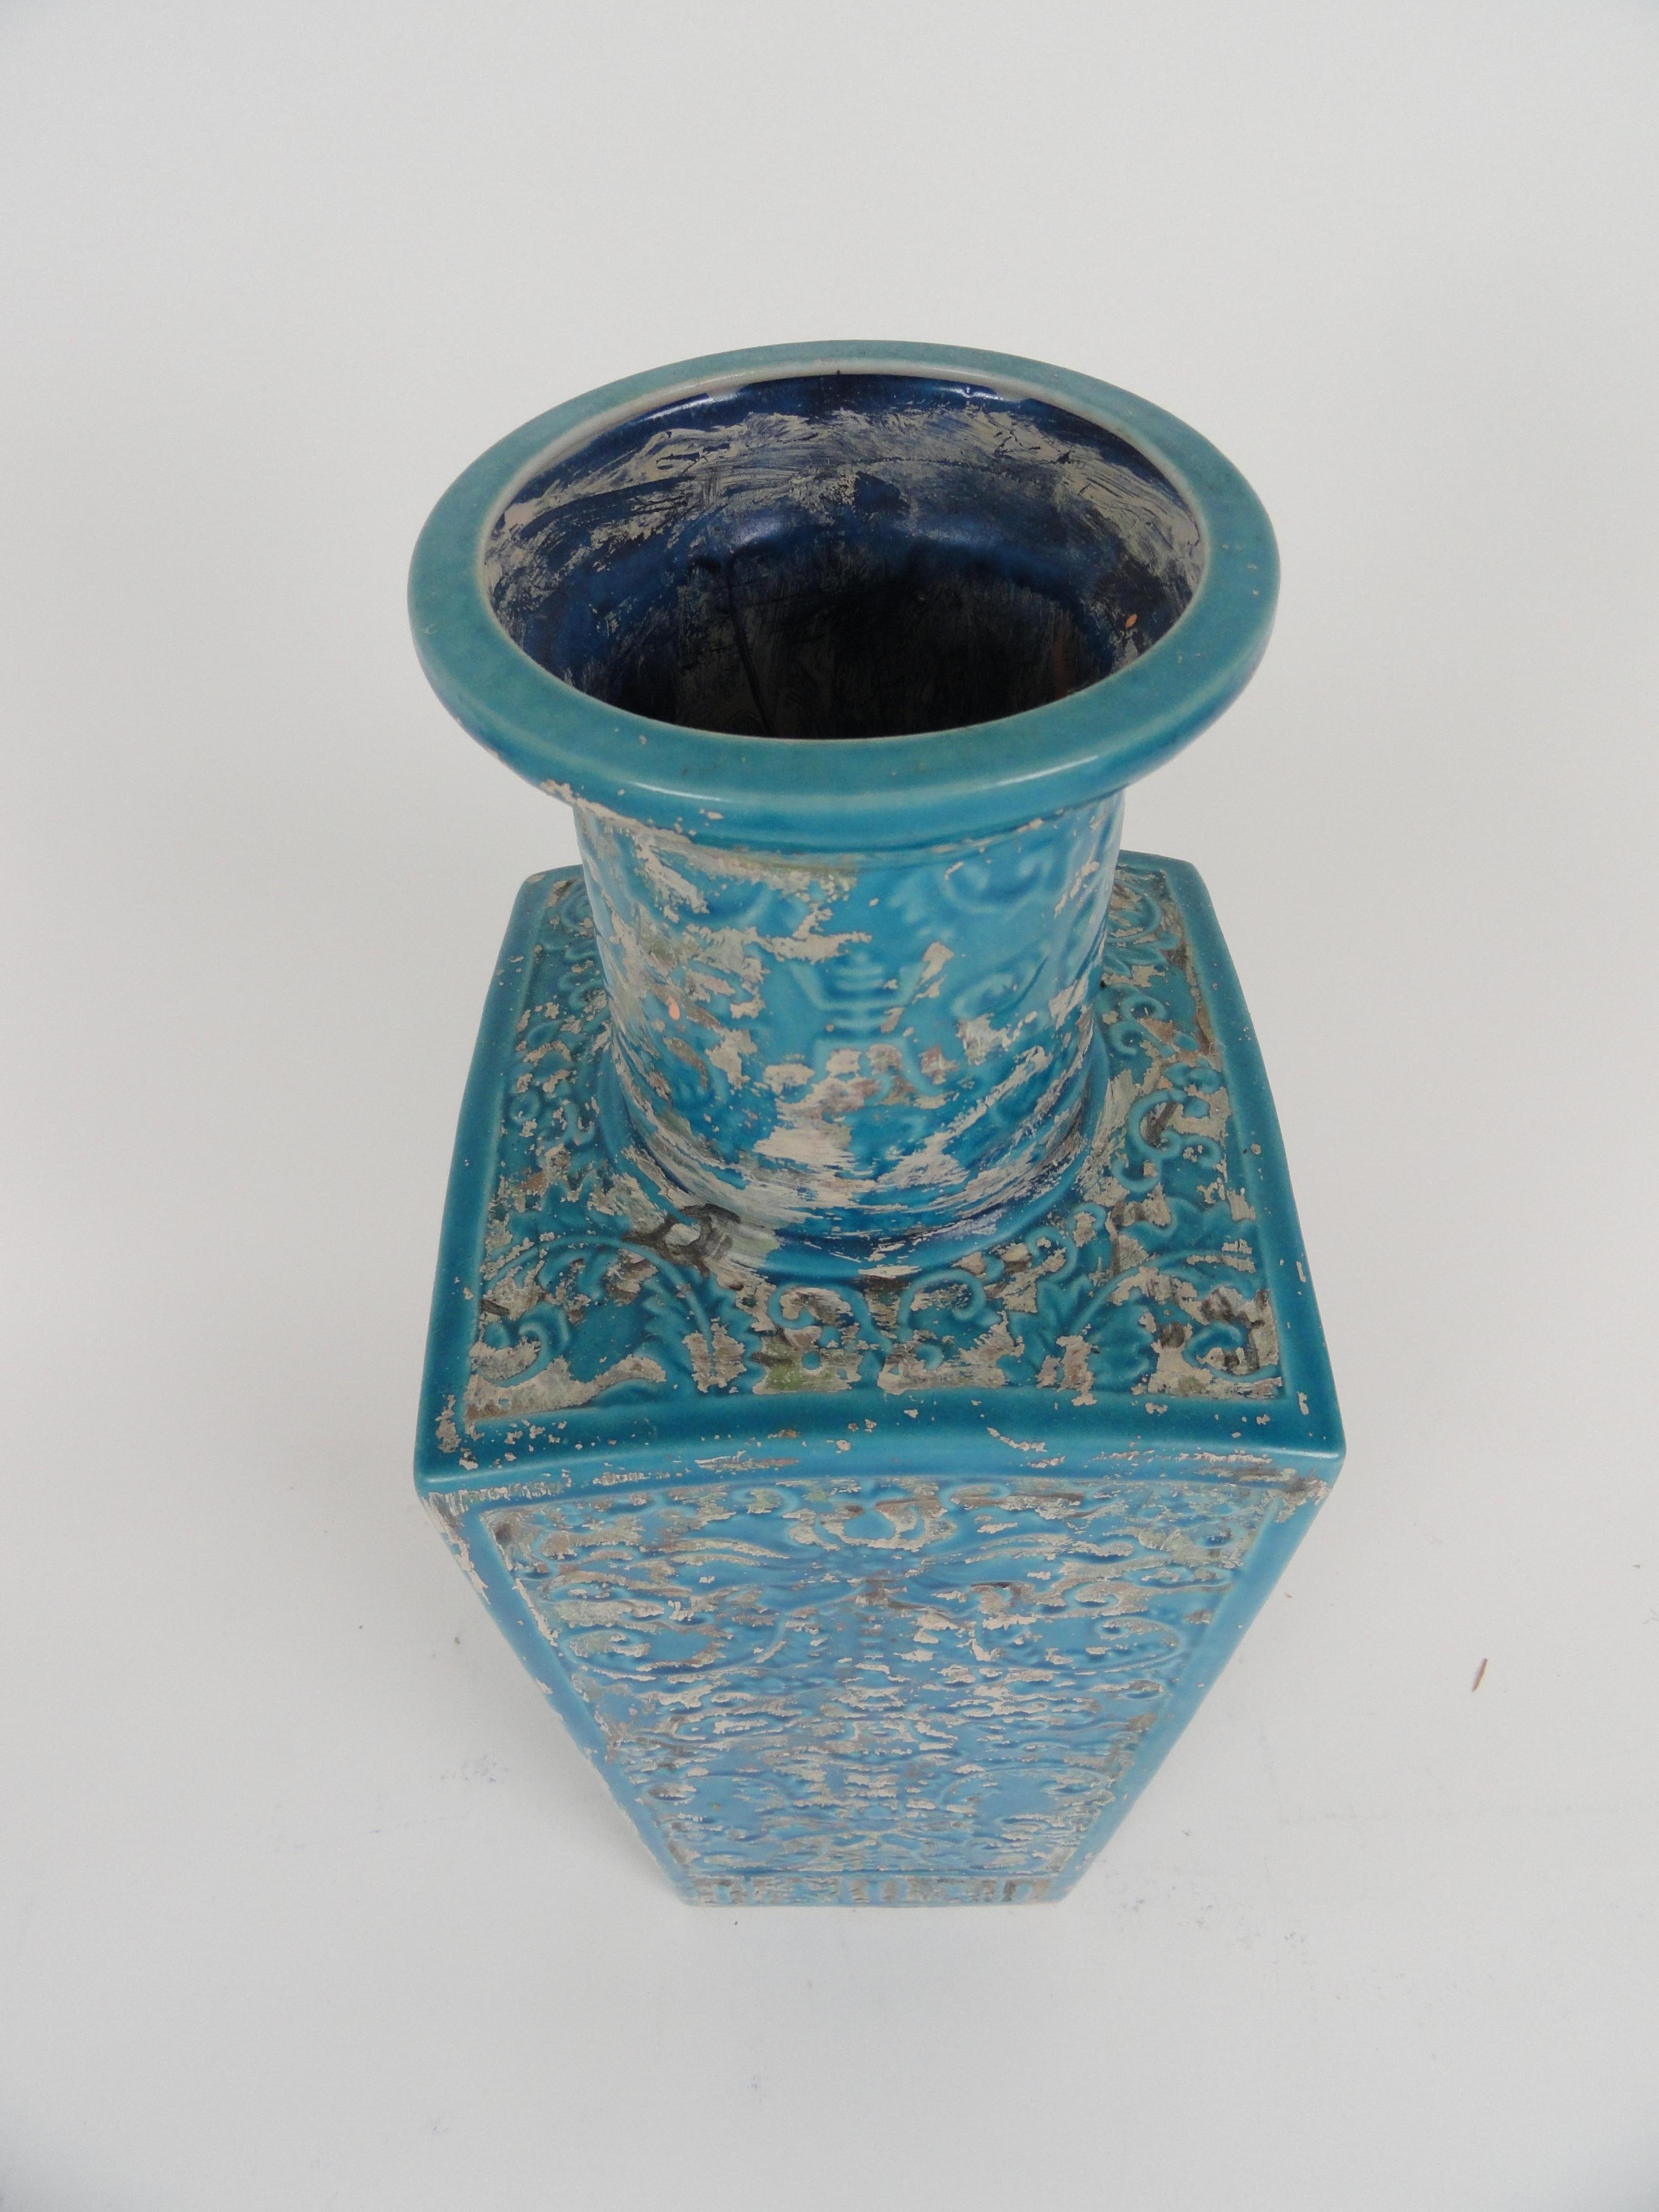 19th century Chinese turquoise glazed vase. Classic large-scale shape with worn patina. Drilled for lamp